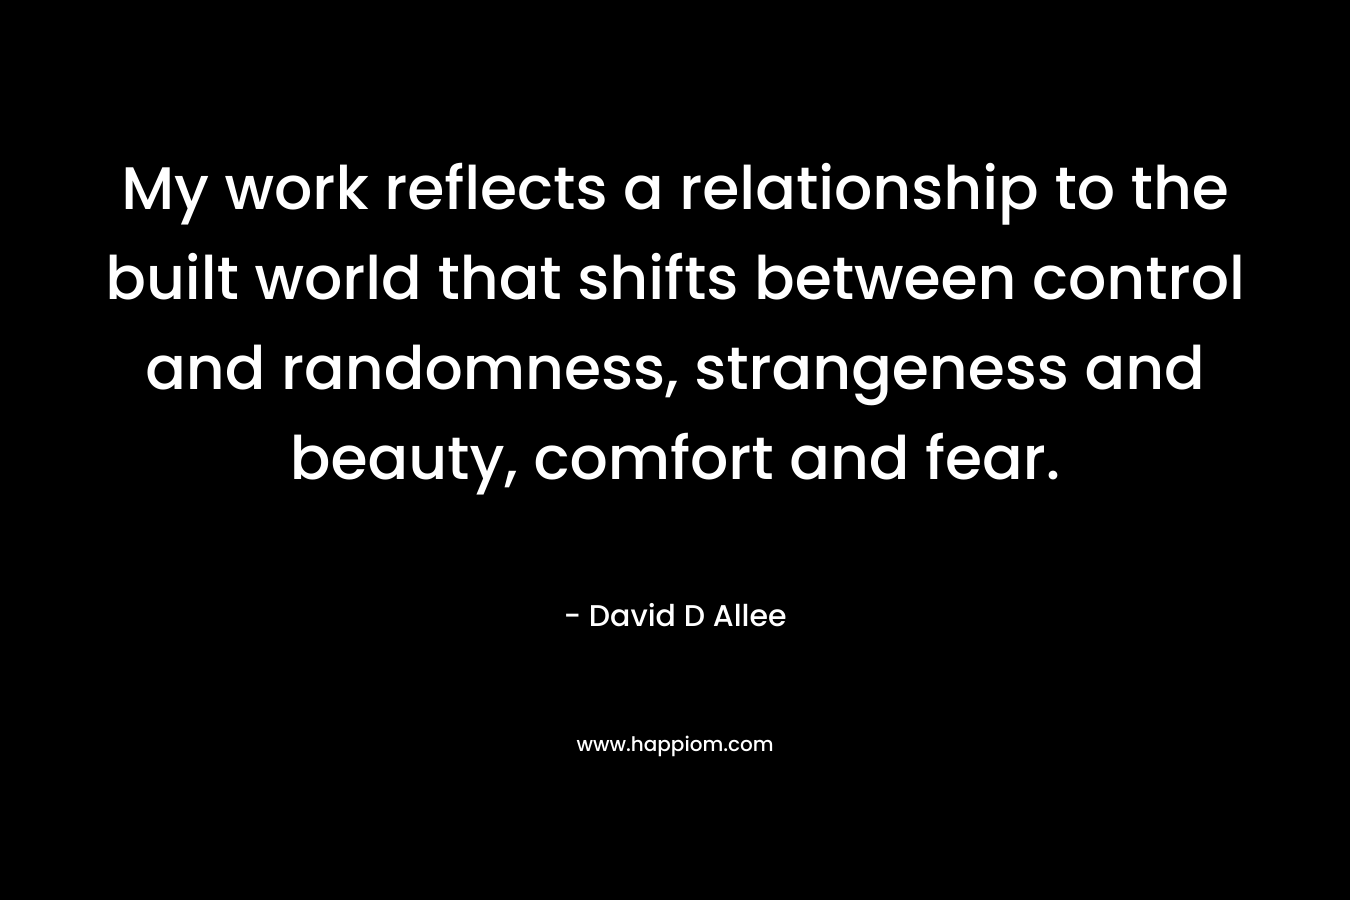 My work reflects a relationship to the built world that shifts between control and randomness, strangeness and beauty, comfort and fear. – David D Allee